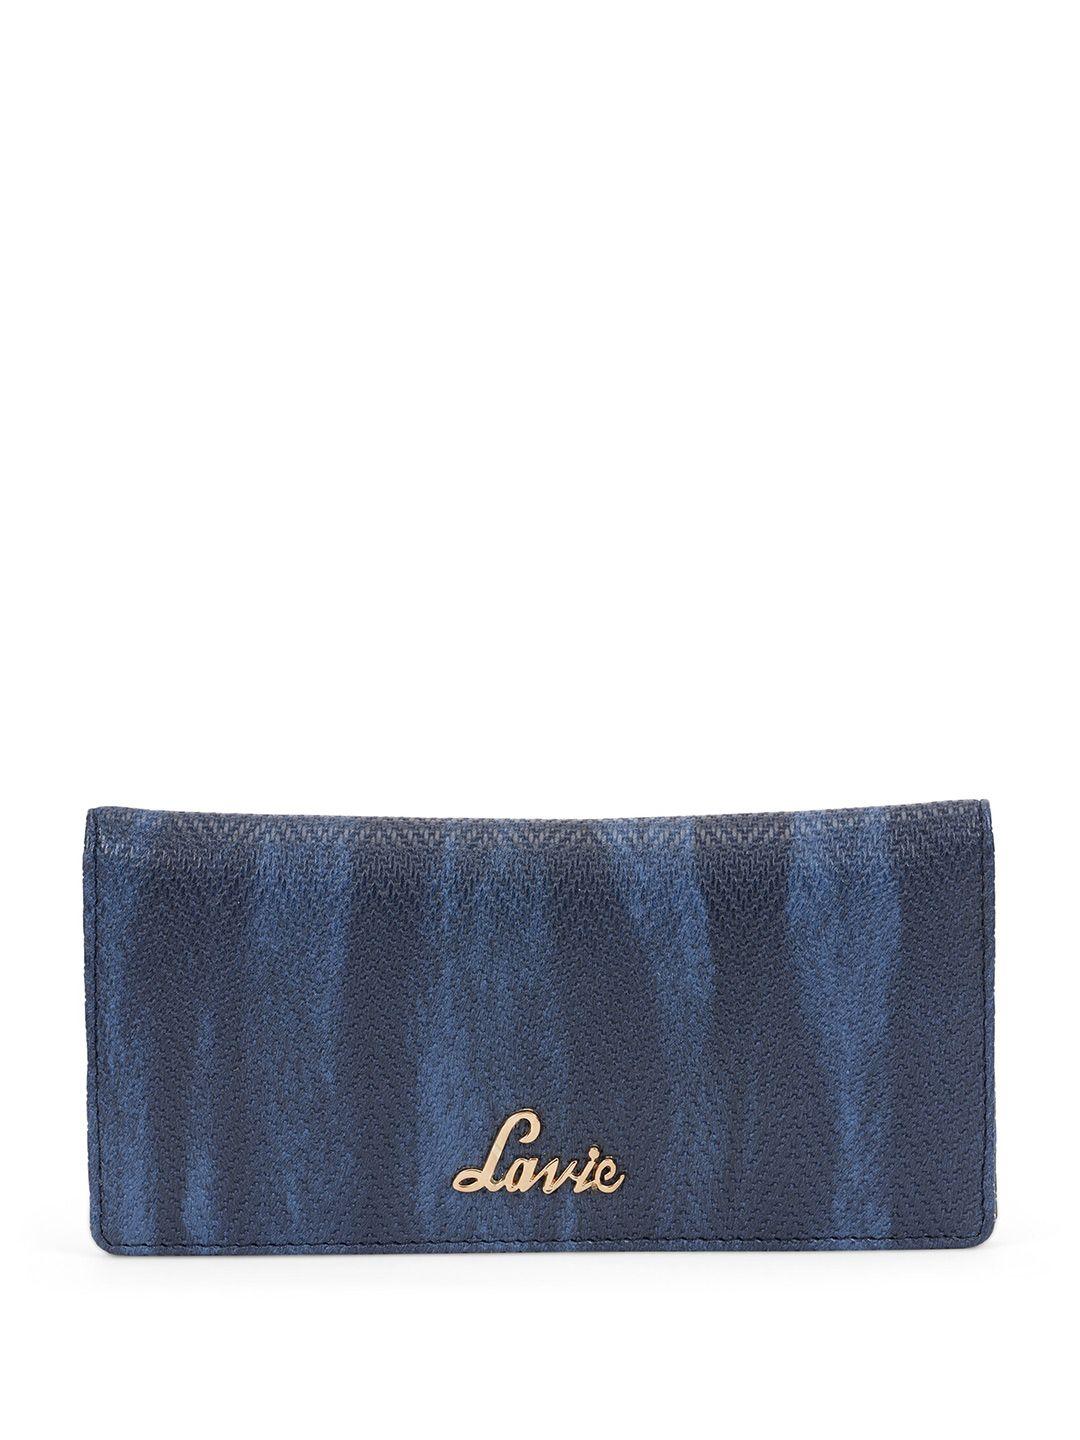 lavie women abstract textured two fold wallet